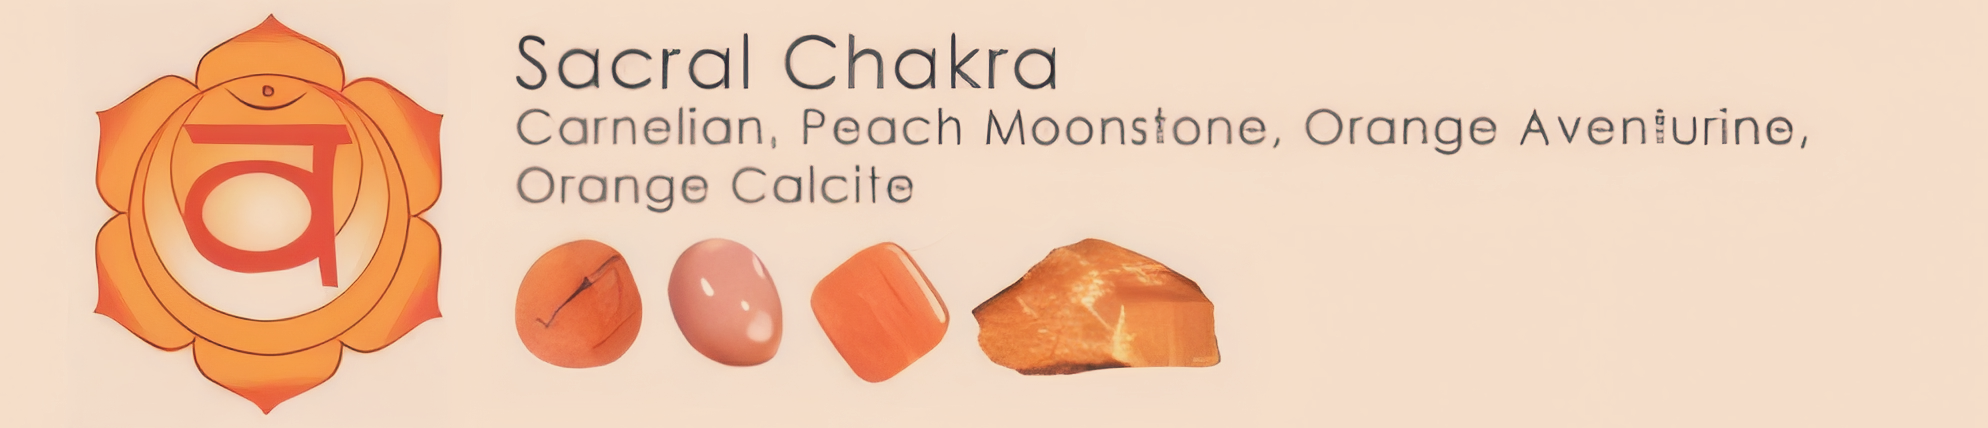 Sacral Chakra Symbol and Gemstones that are healing/ strengthening it with Pictures.